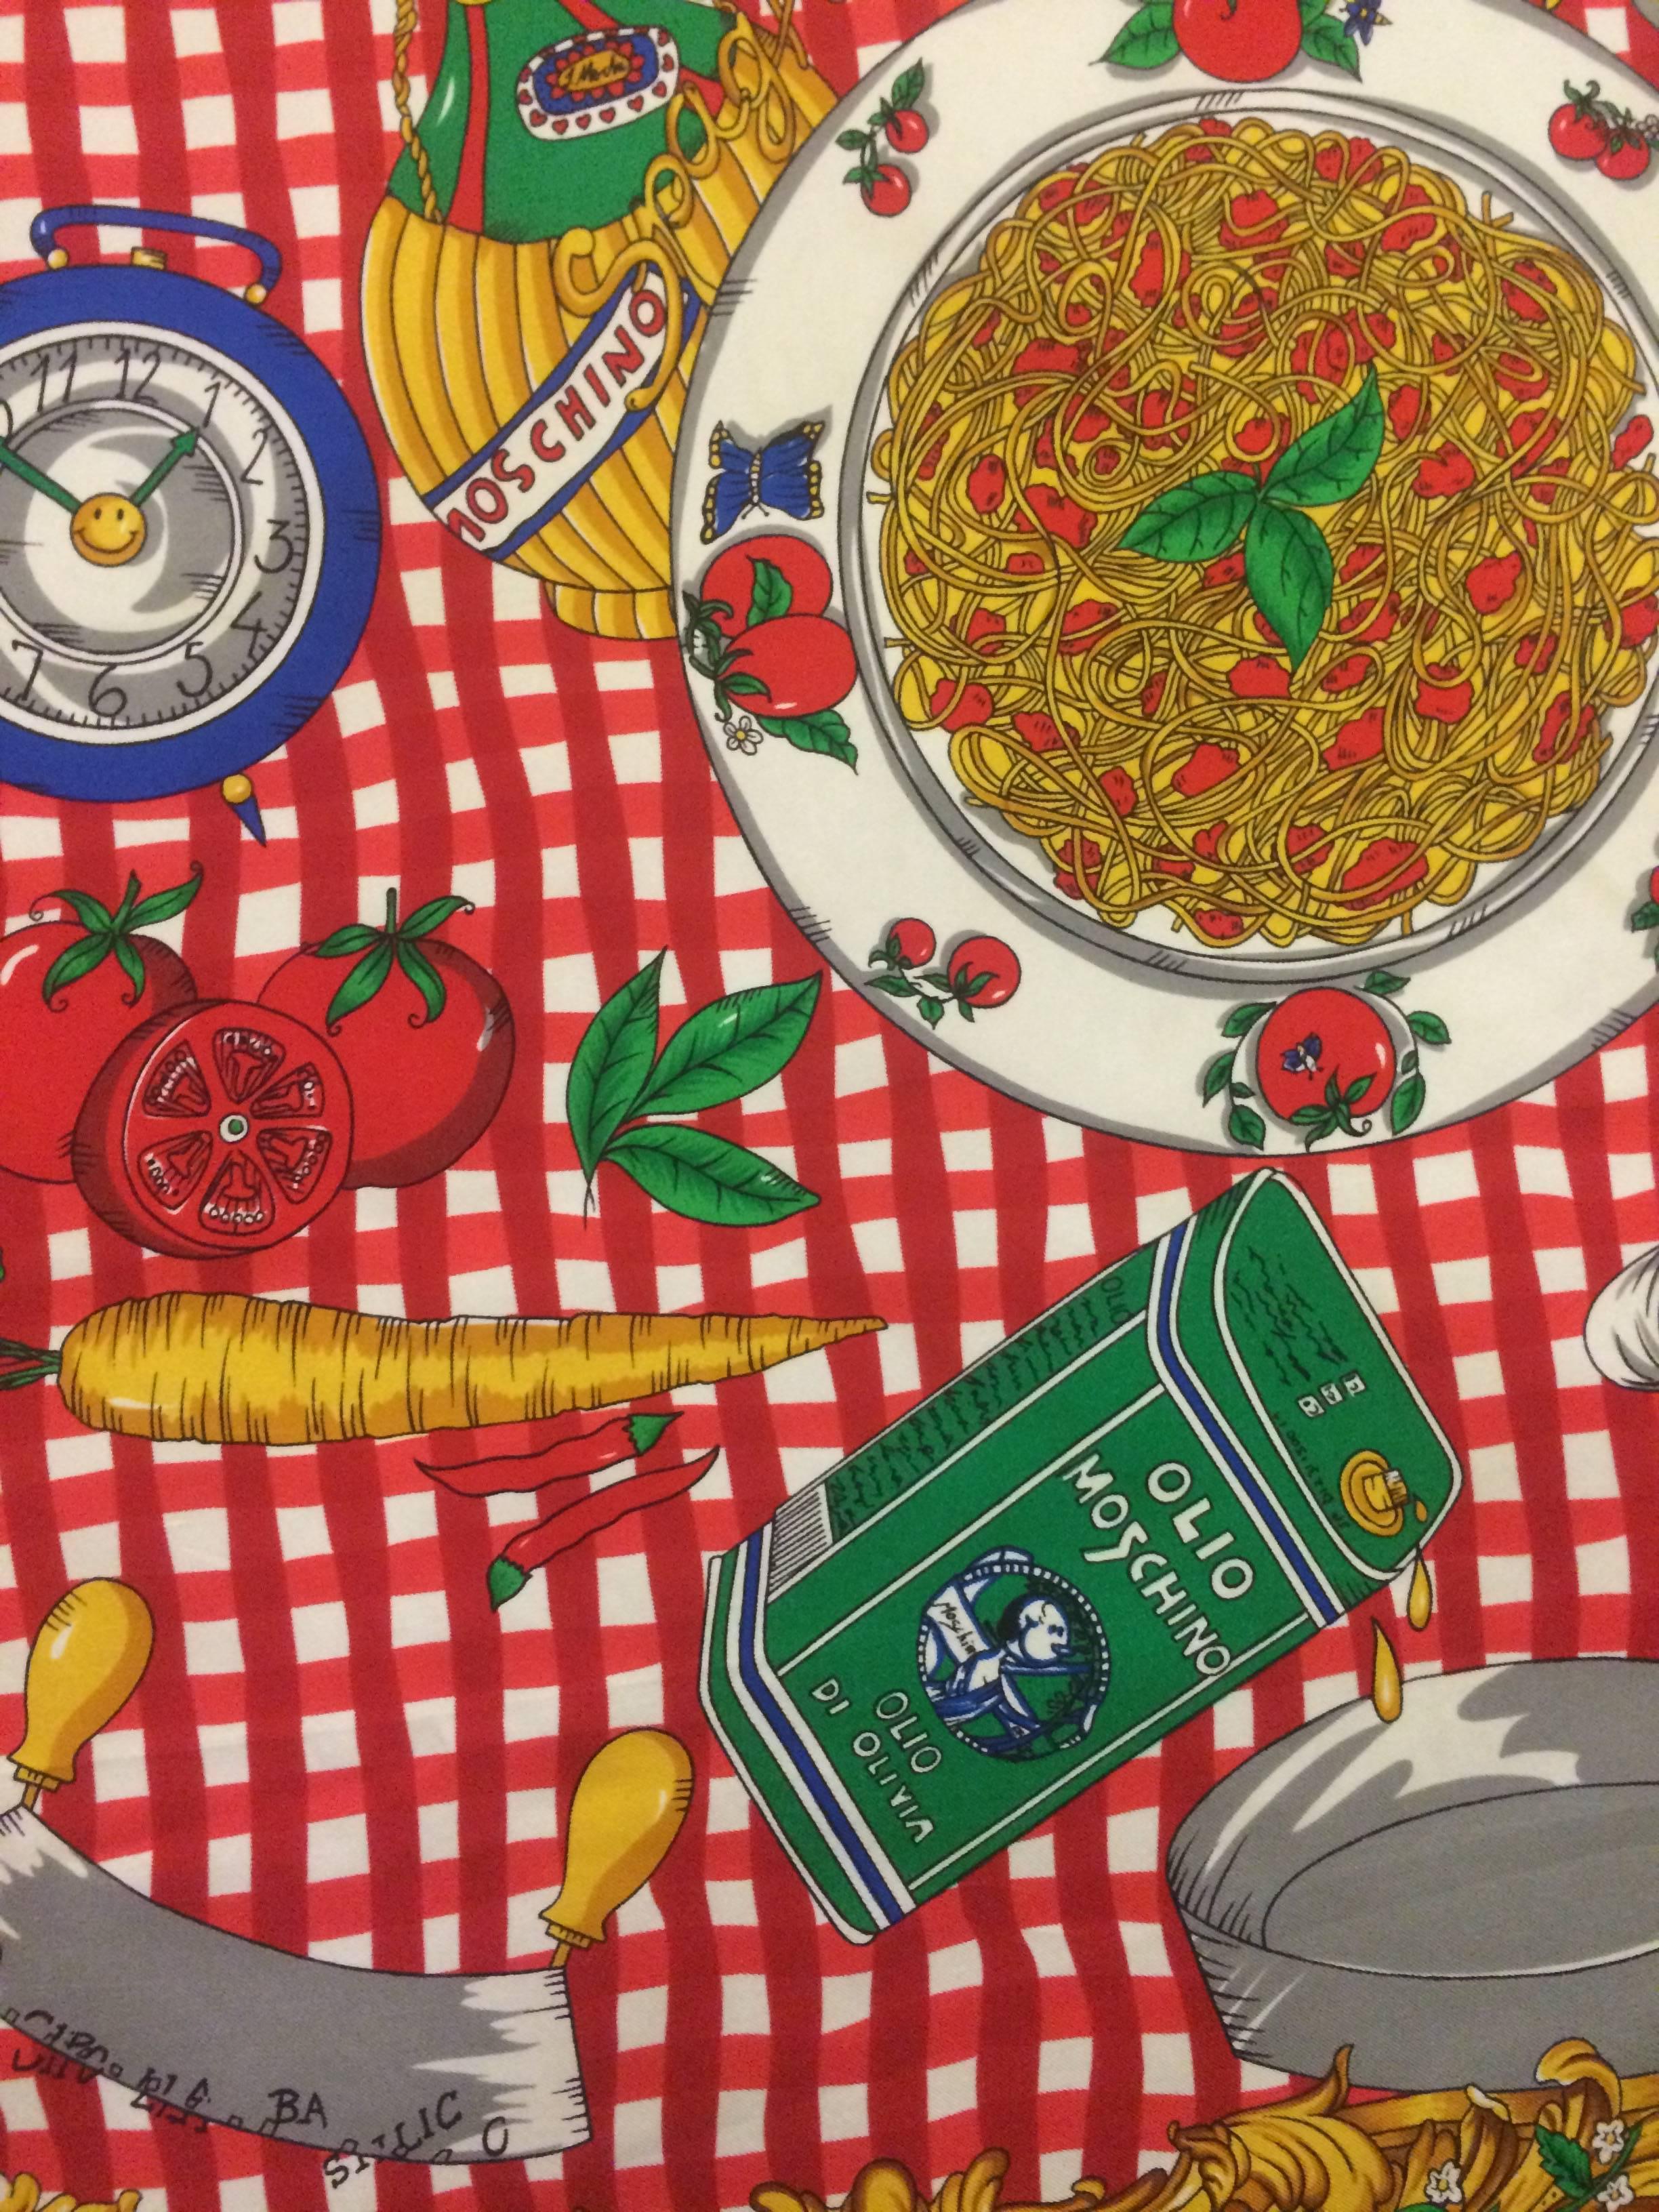 Moschino 90s Italian dinner print scarf shoes a checkered table cloth covered with Moschino branded pasta ingredients and wine.

Fabric tag removed, feels like 100% silk. 

34